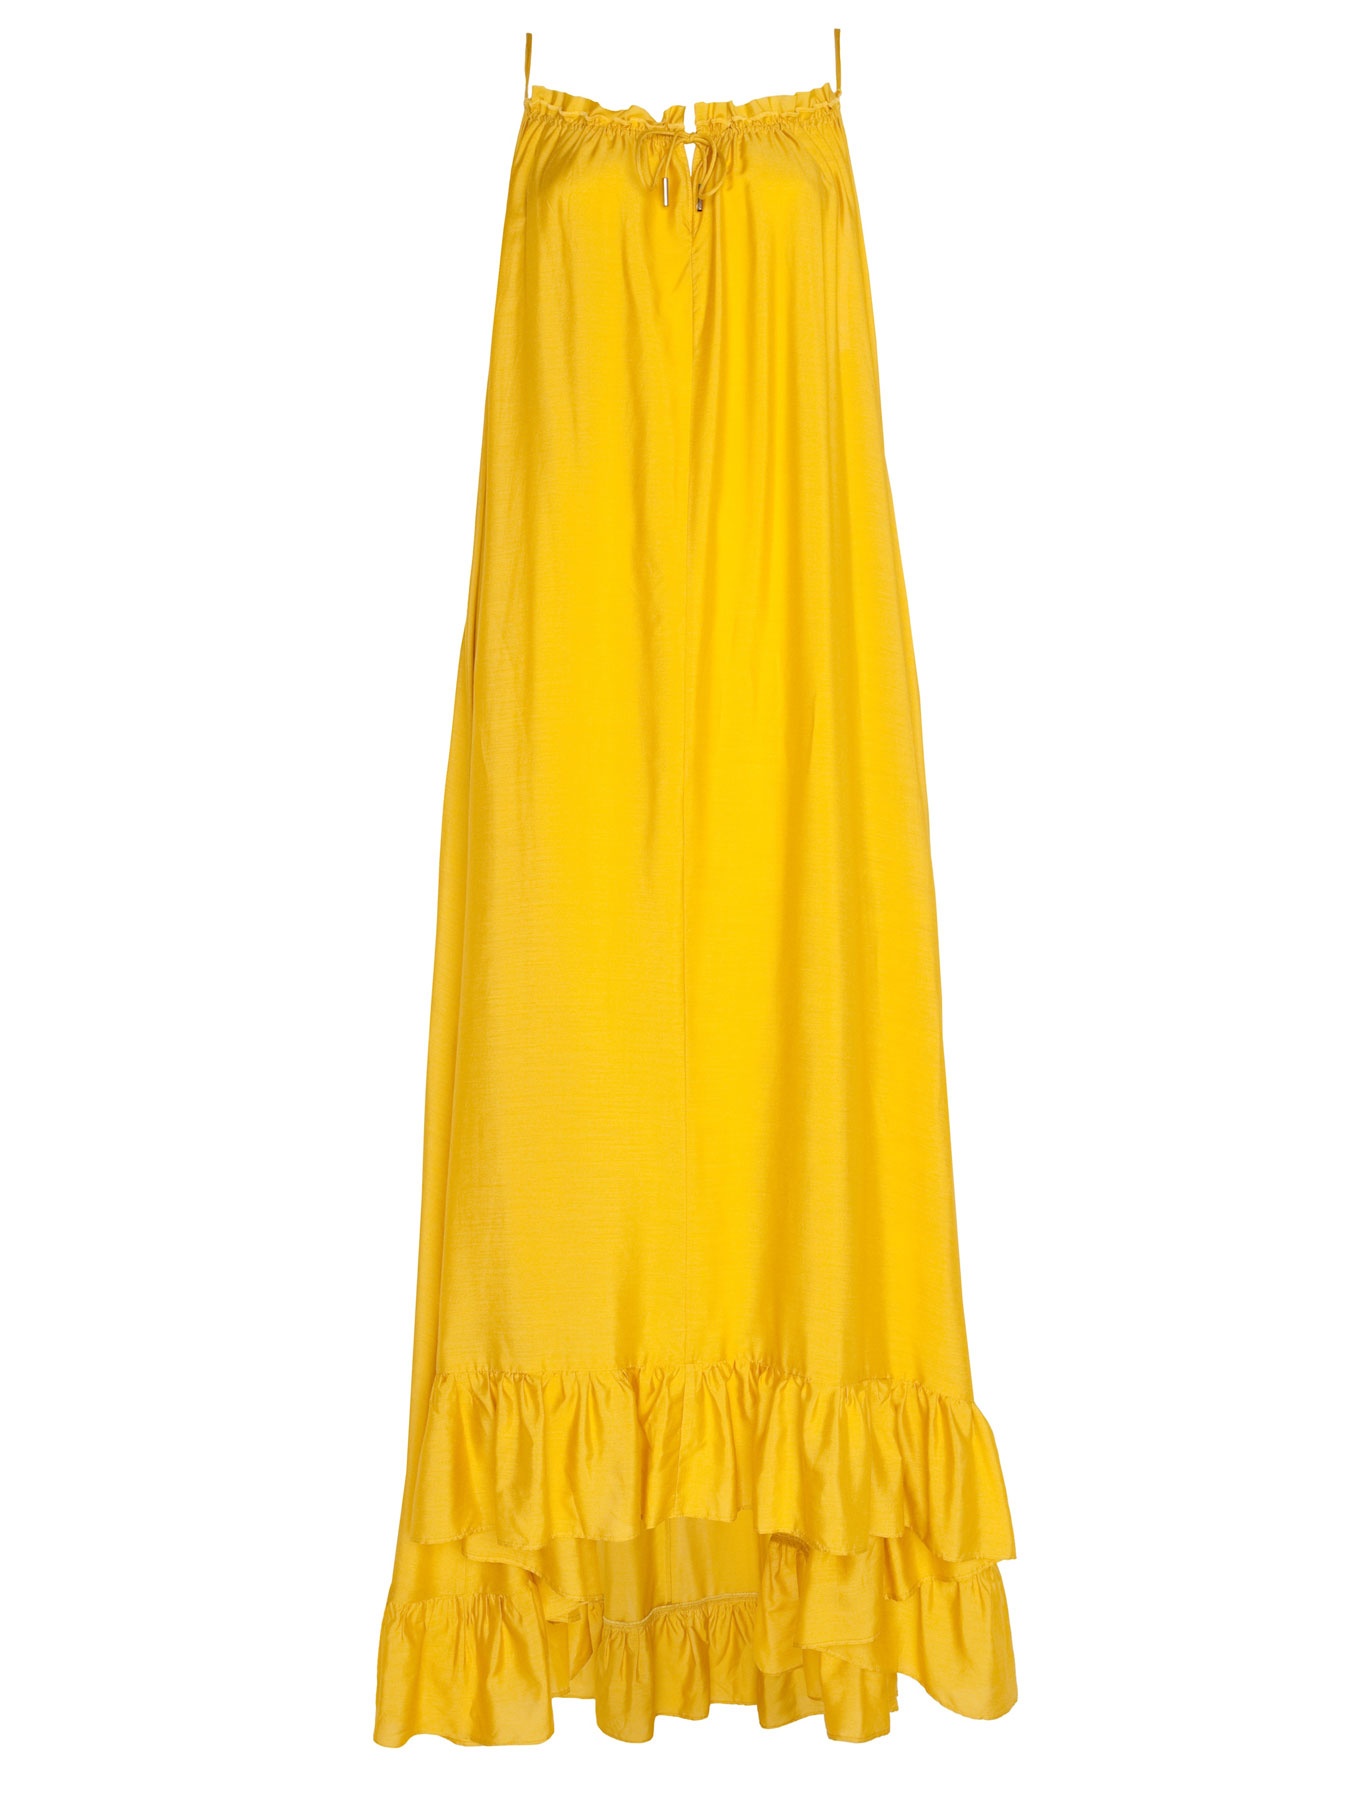 Lyst - Alice By Temperley Allegro Parachute Dress in Yellow